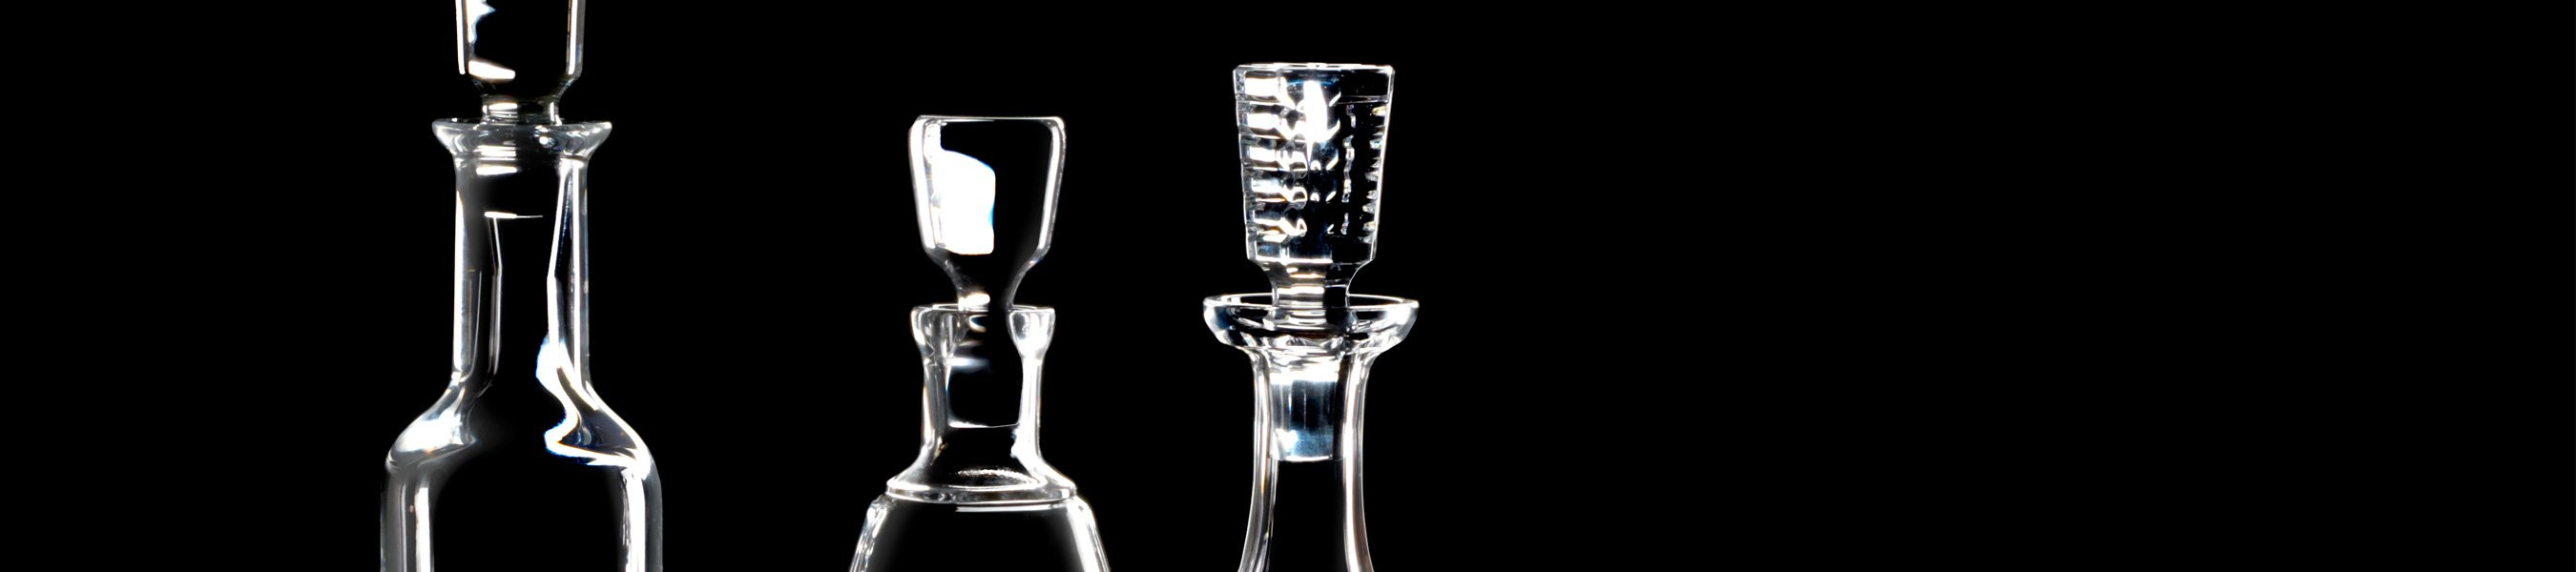 17 Lovable Marquis by Waterford Versa Vase 2024 free download marquis by waterford versa vase of crystal decanters pitchers carafes waterforda us with waterford crystal decanters pitchers carafes